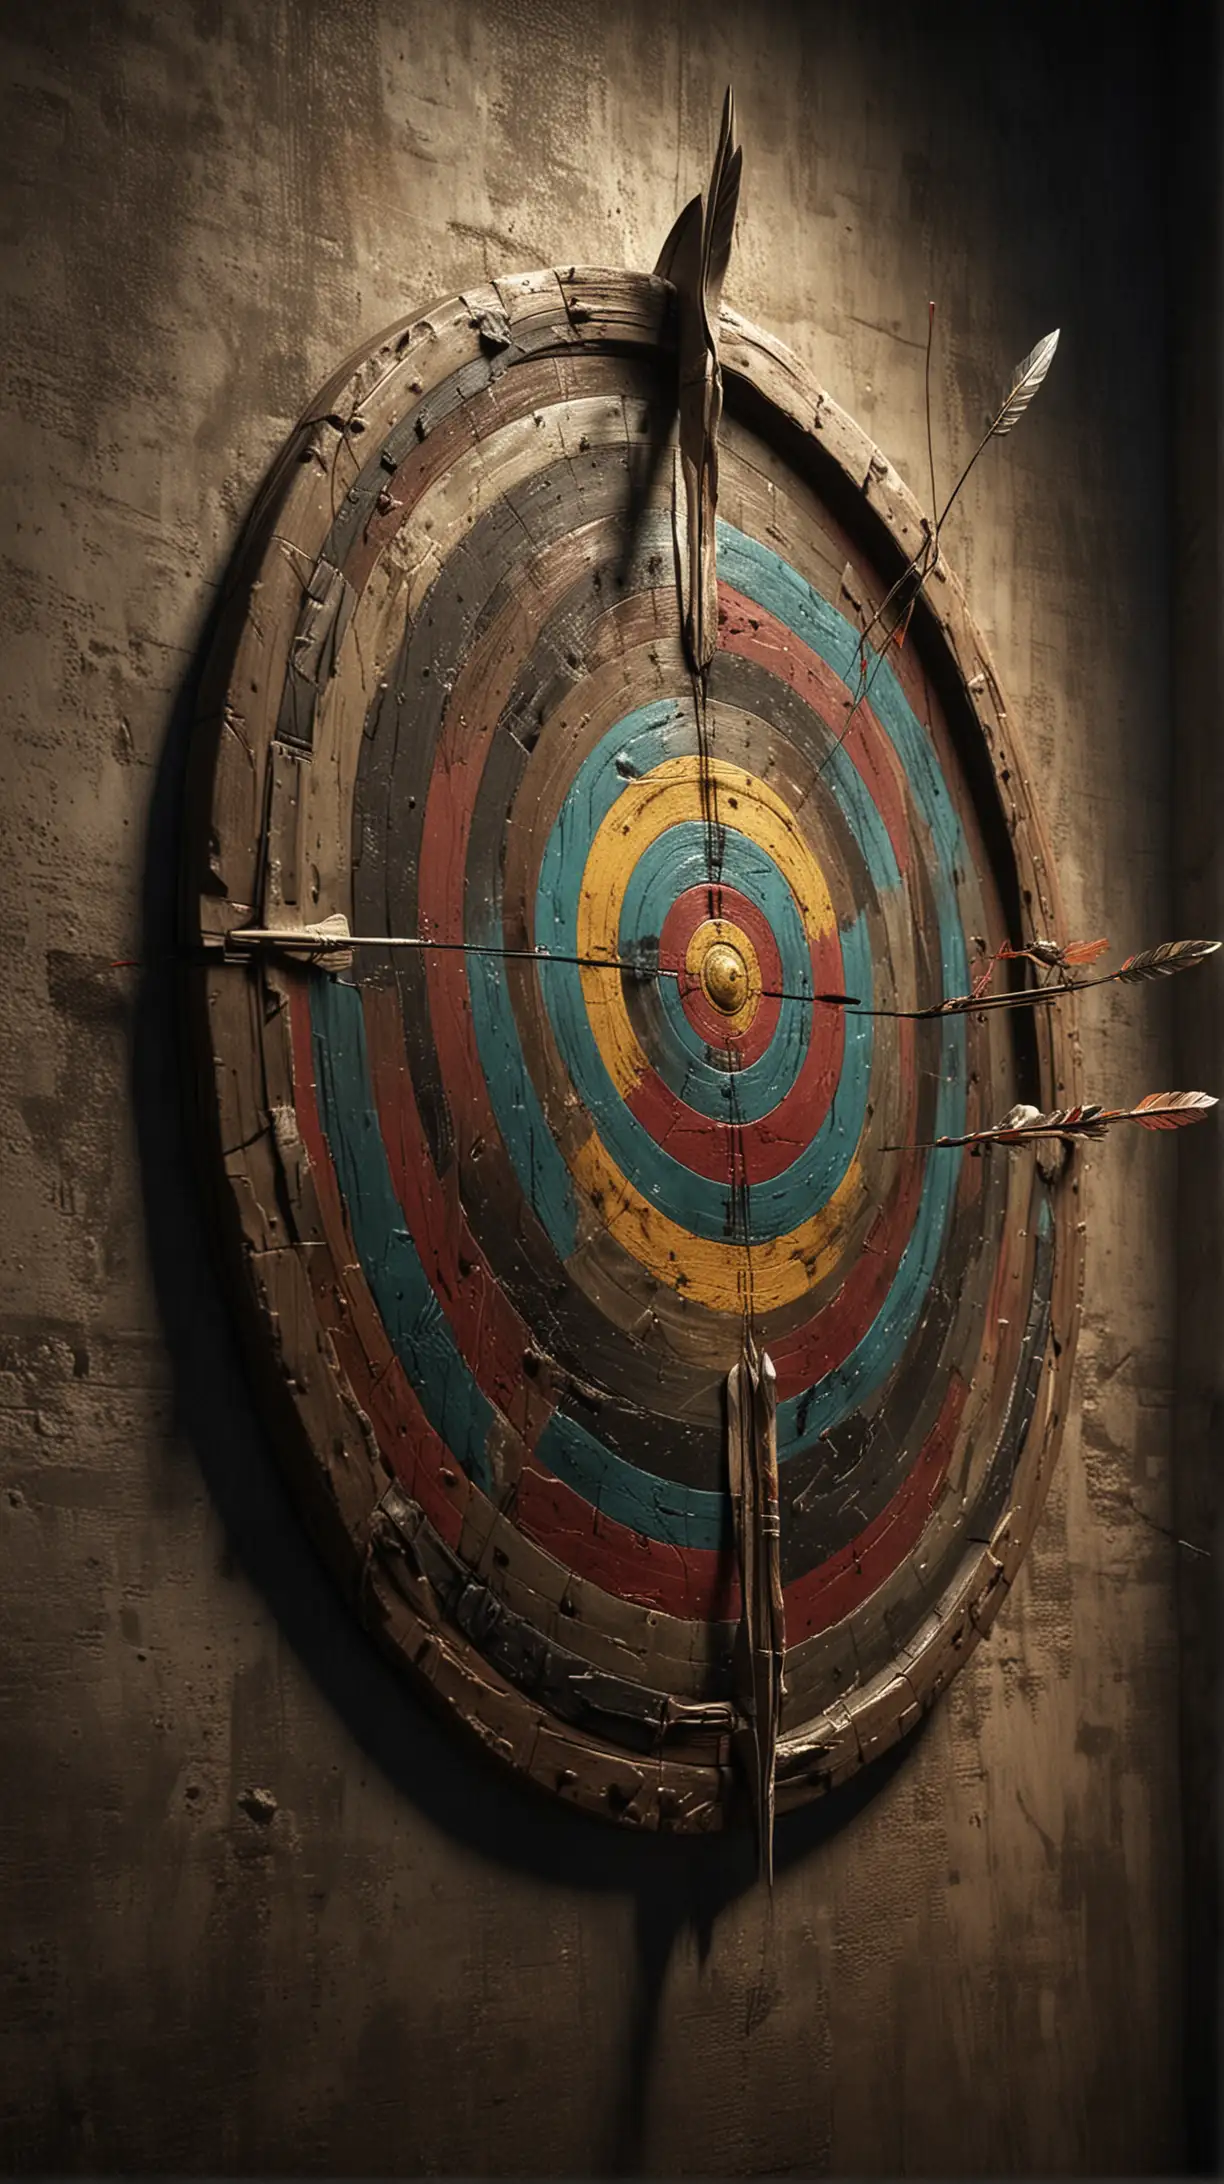 An ancient arrow is piercing through the target perfectly is portrayed ,symbolizing the successful hit and accomplishment of the archer's goal. Highly realistic. Create mildly dark and colourful atmospheric images inspired by noir video games. Use with Vision XL for best results.